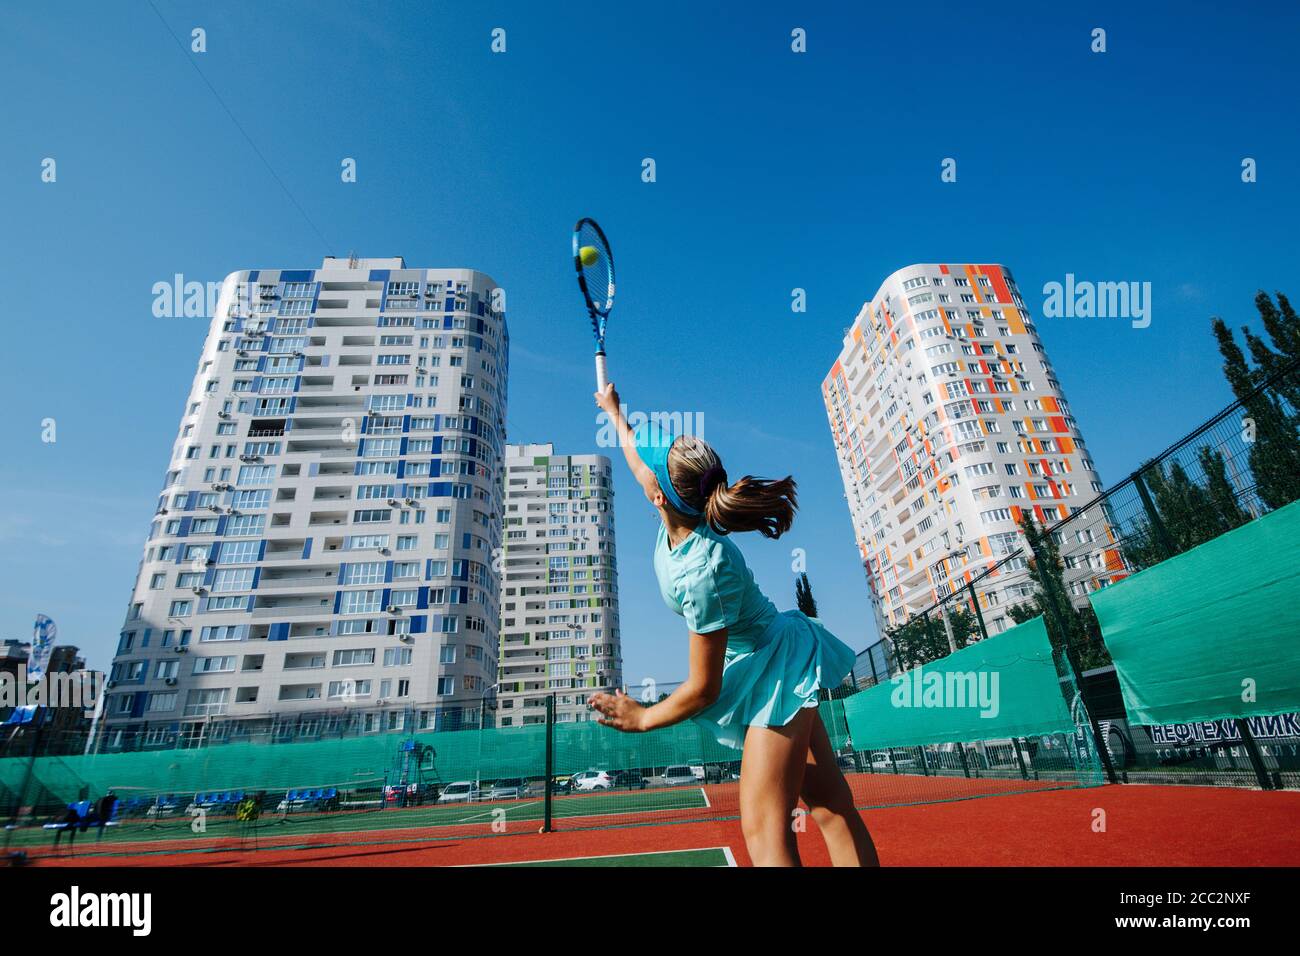 Eager girl training on a new tennis court, throwing ball up and serving Stock Photo